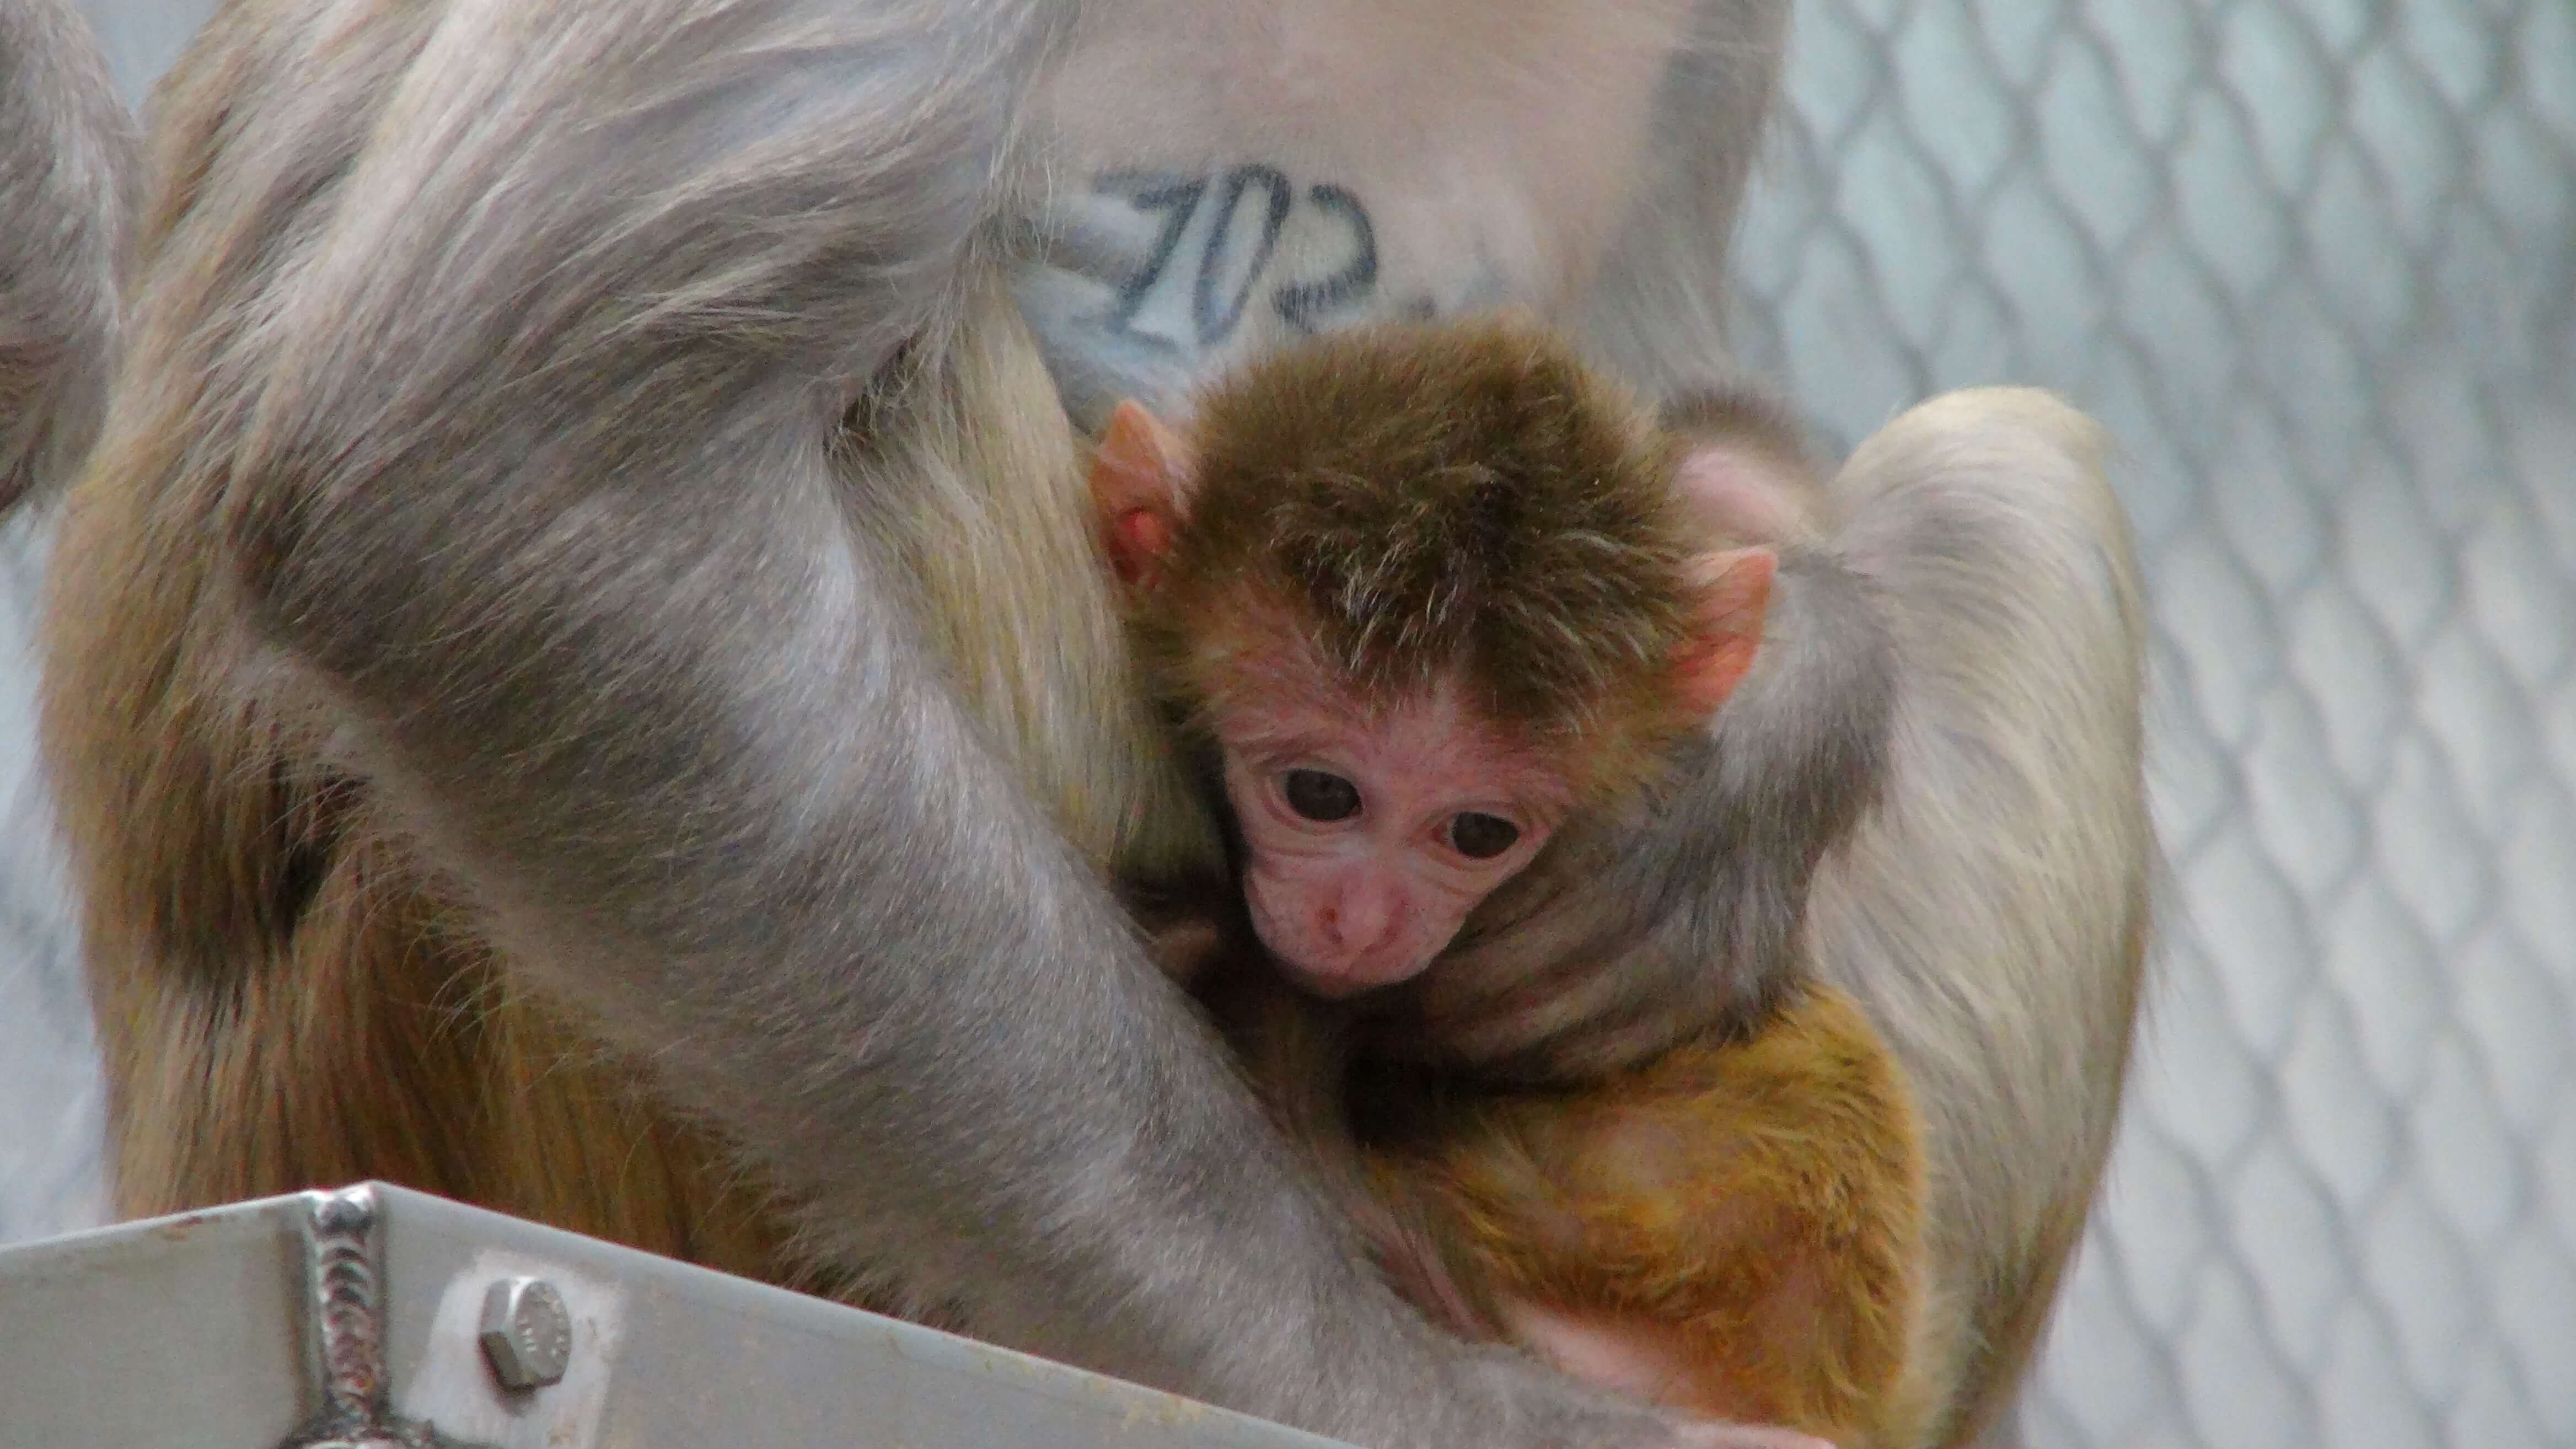 Mother and baby monkeys held by NIH for experimentation.